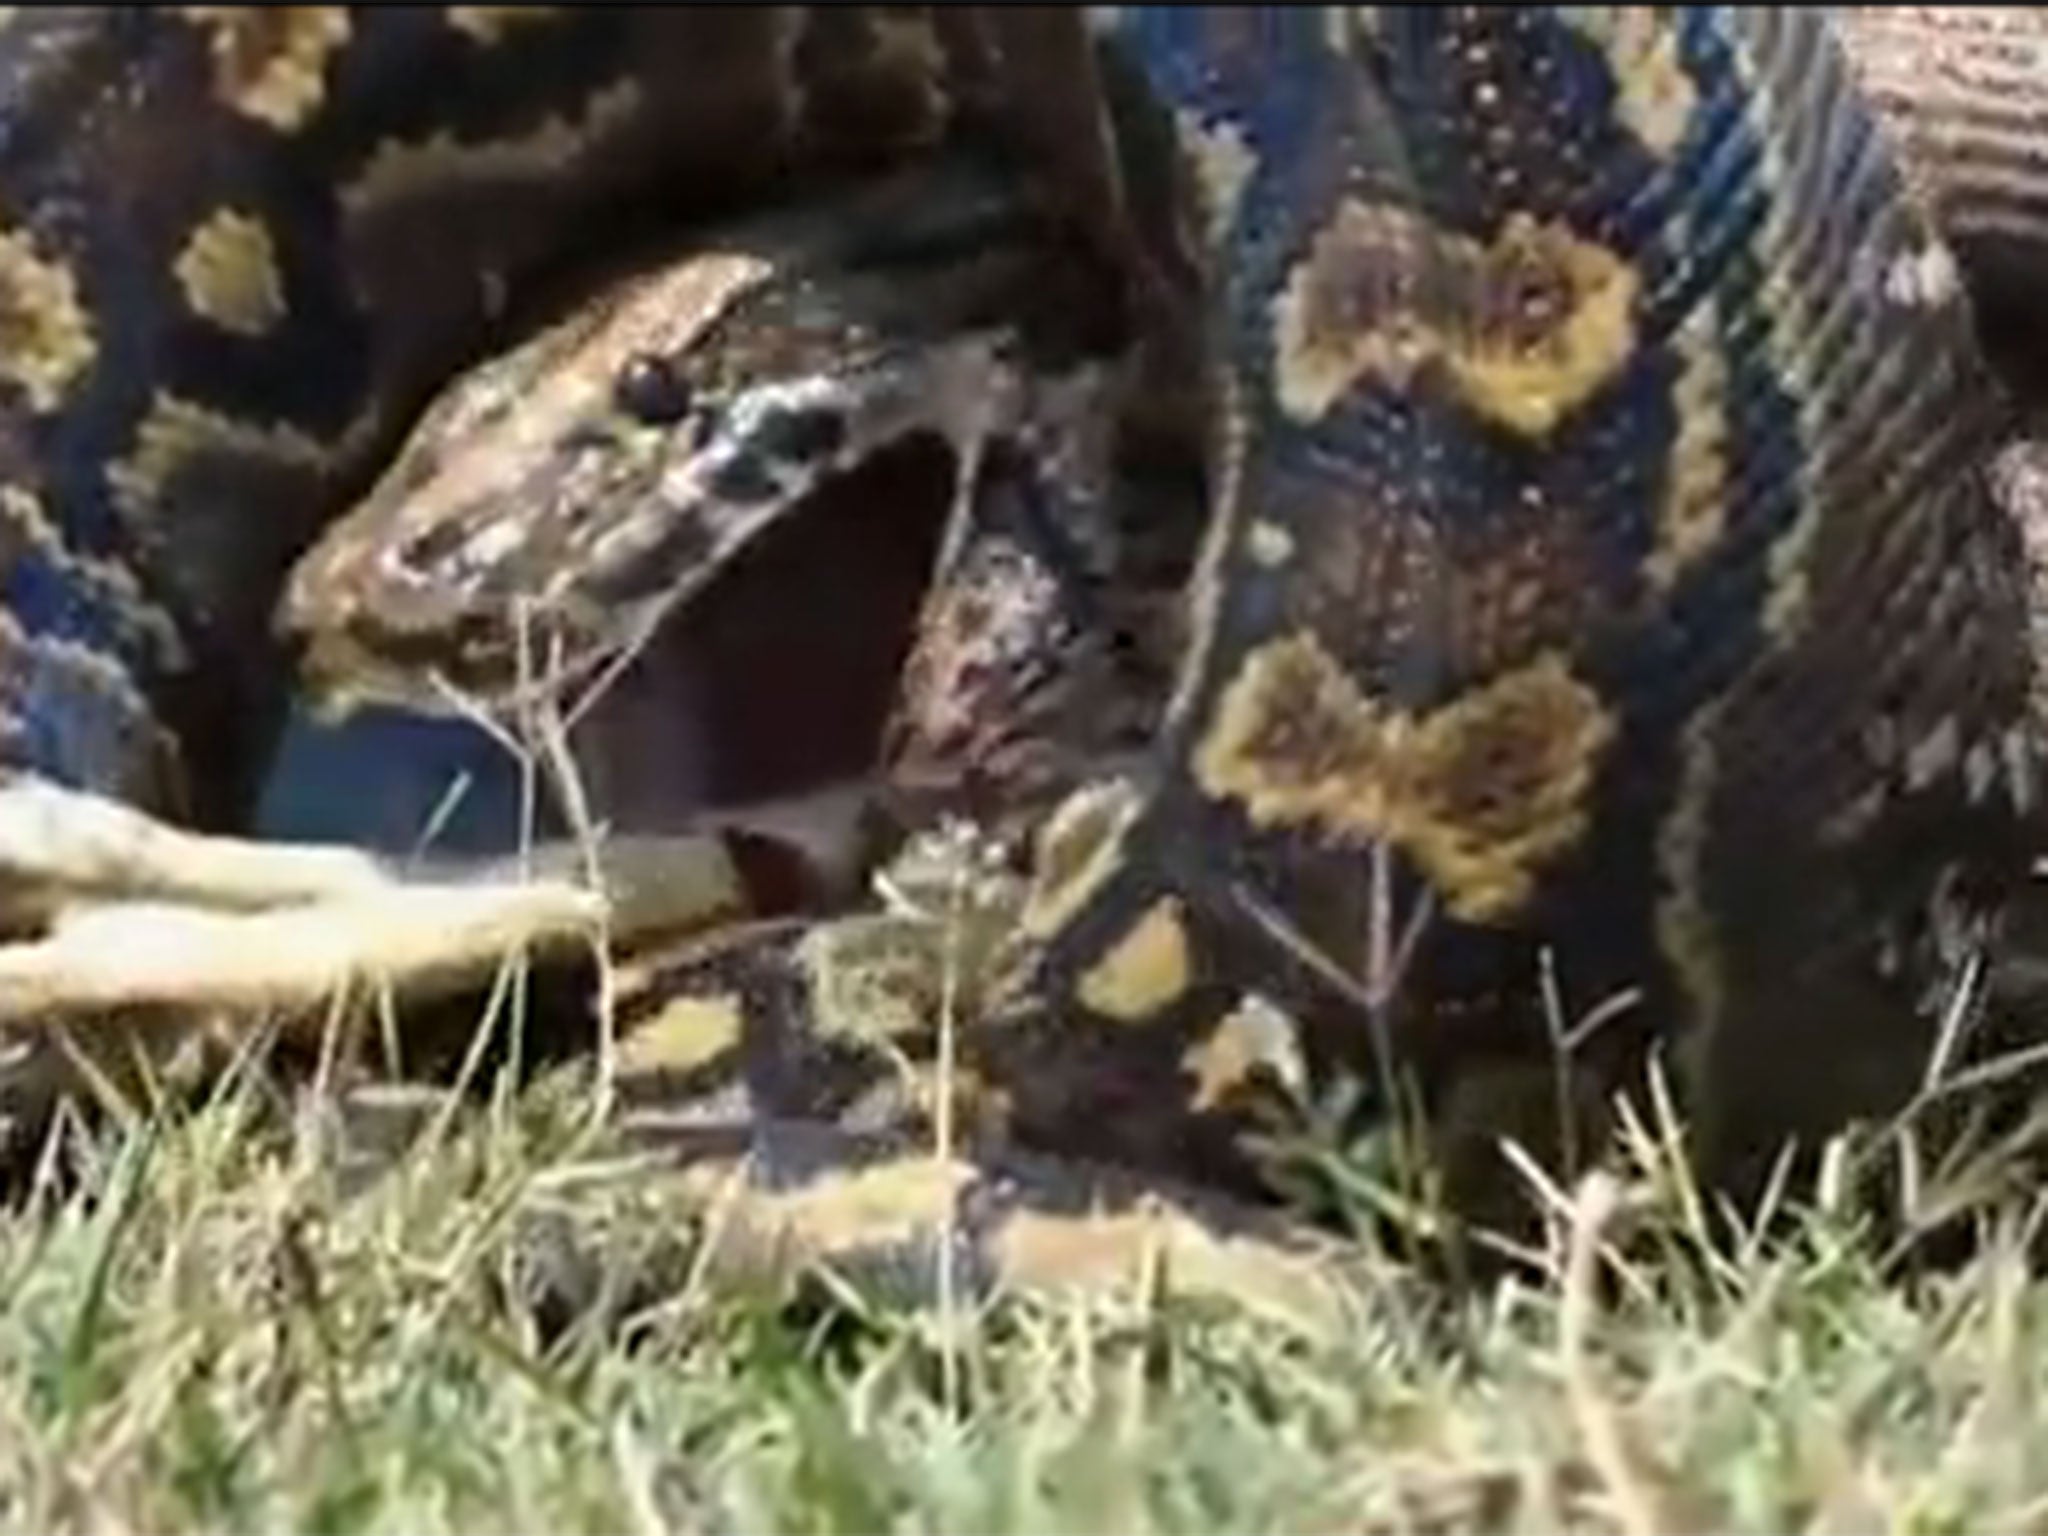 It is very rare for a python to eat a baby impala in the wild